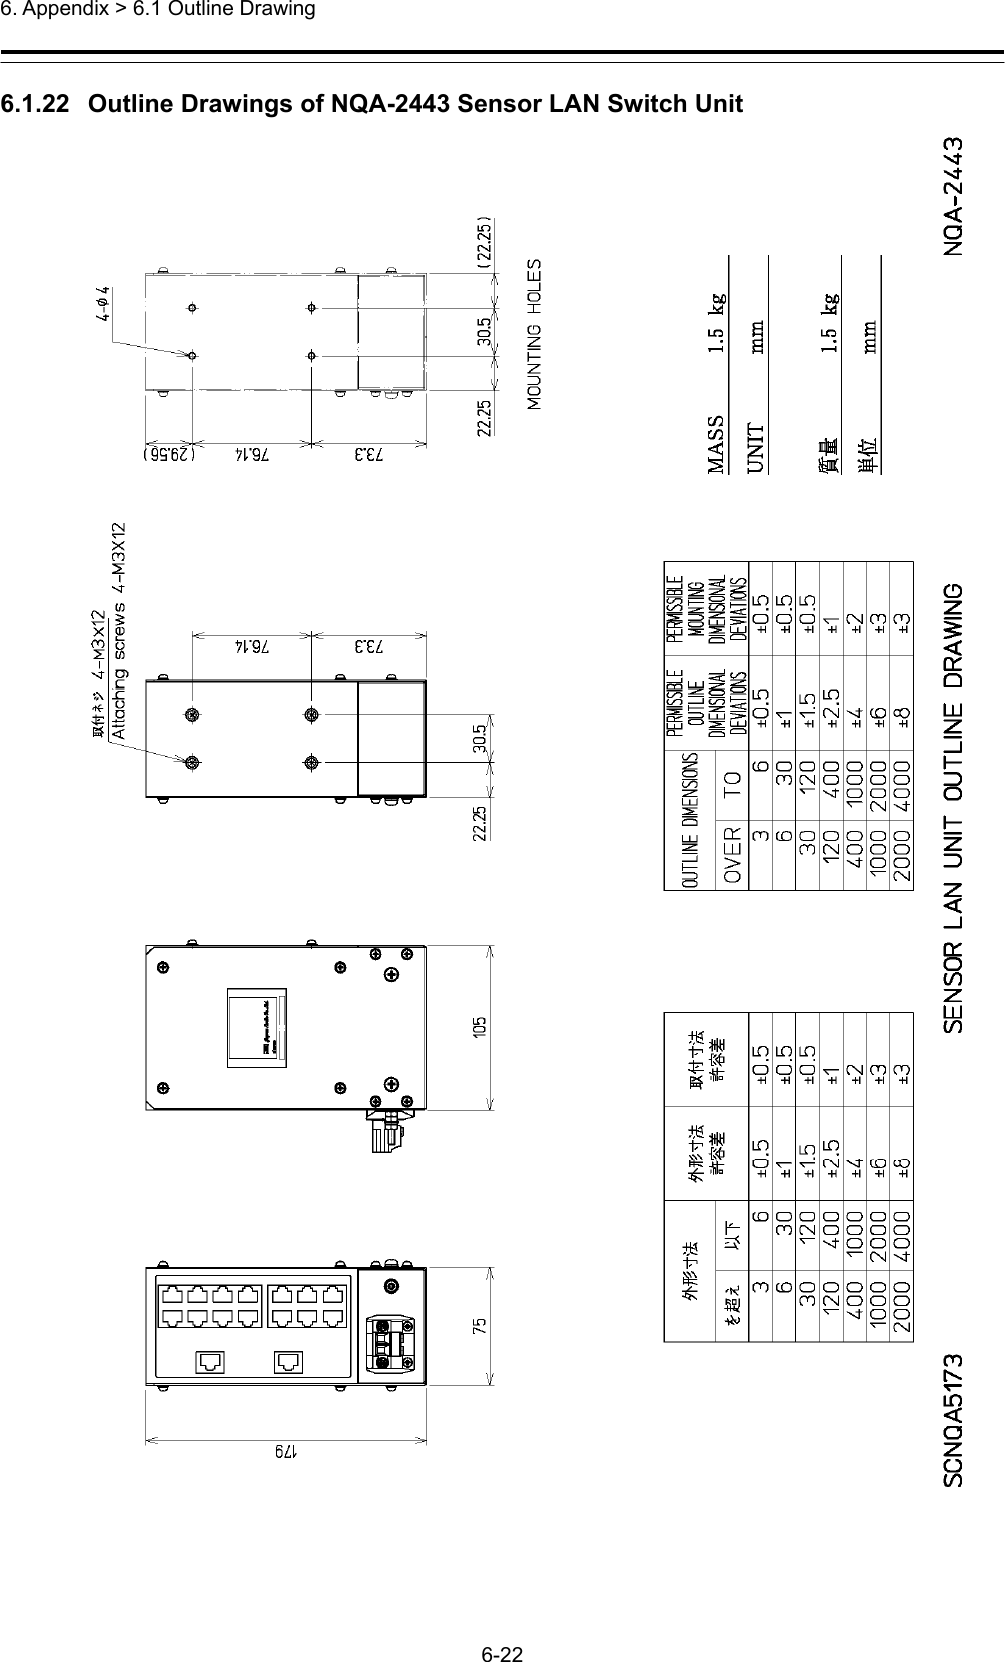  6. Appendix &gt; 6.1 Outline Drawing 6-22  6.1.22   Outline Drawings of NQA-2443 Sensor LAN Switch Unit  